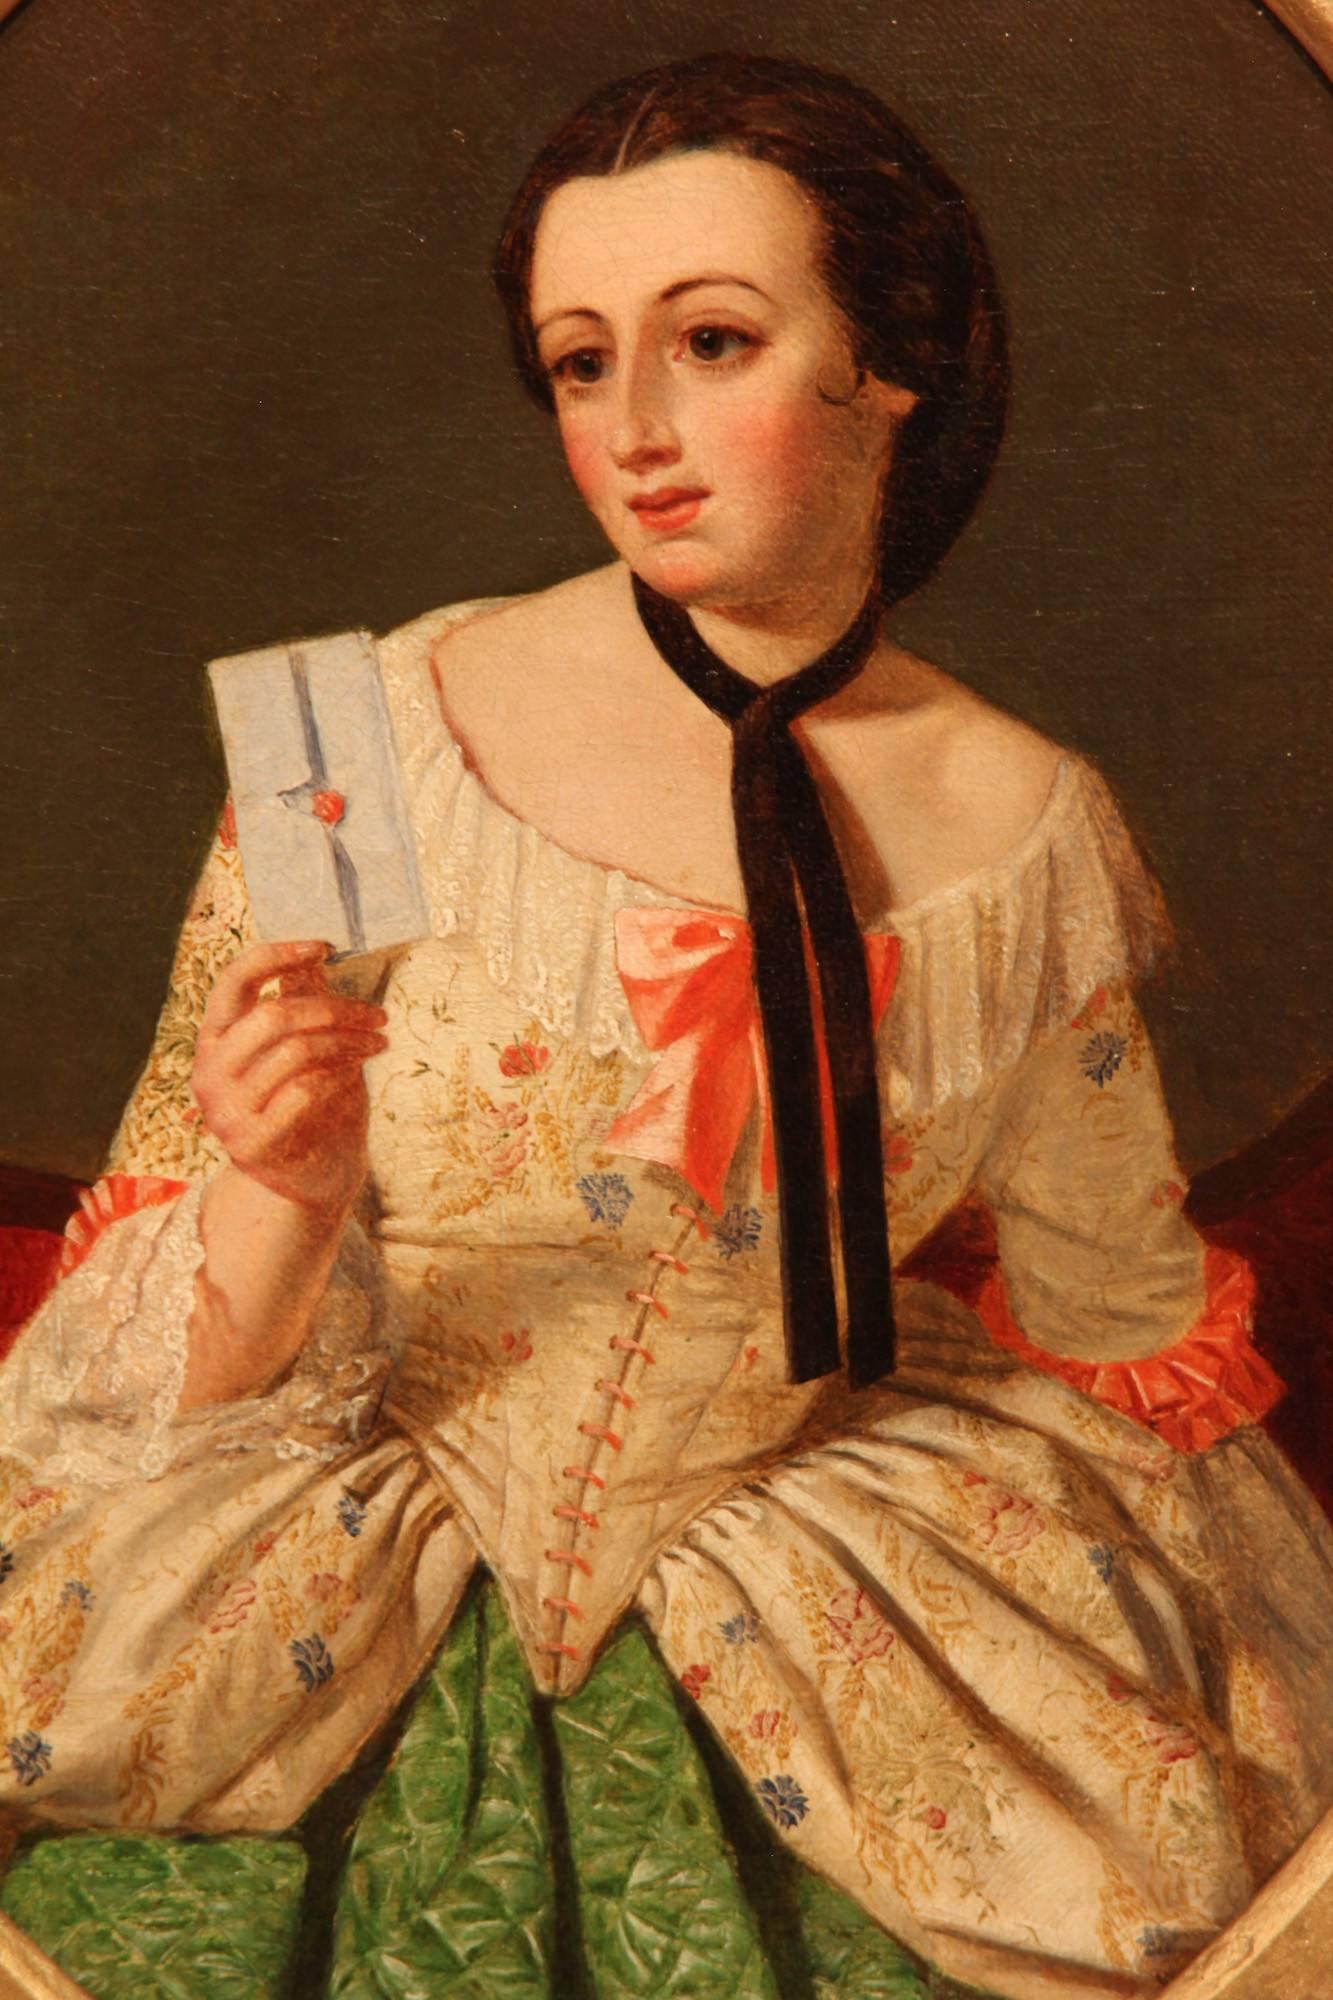 "The Letter" oil painting attributed to Philip Hoyoll. Philip Hoyoll, 1816-1875 was a figurative painter studied Dusseldorf Academy, oil on canvas, 12 x 9" oval. 

Measures: Frame:
Height 17.5" (44.5cm),
width 15.25"